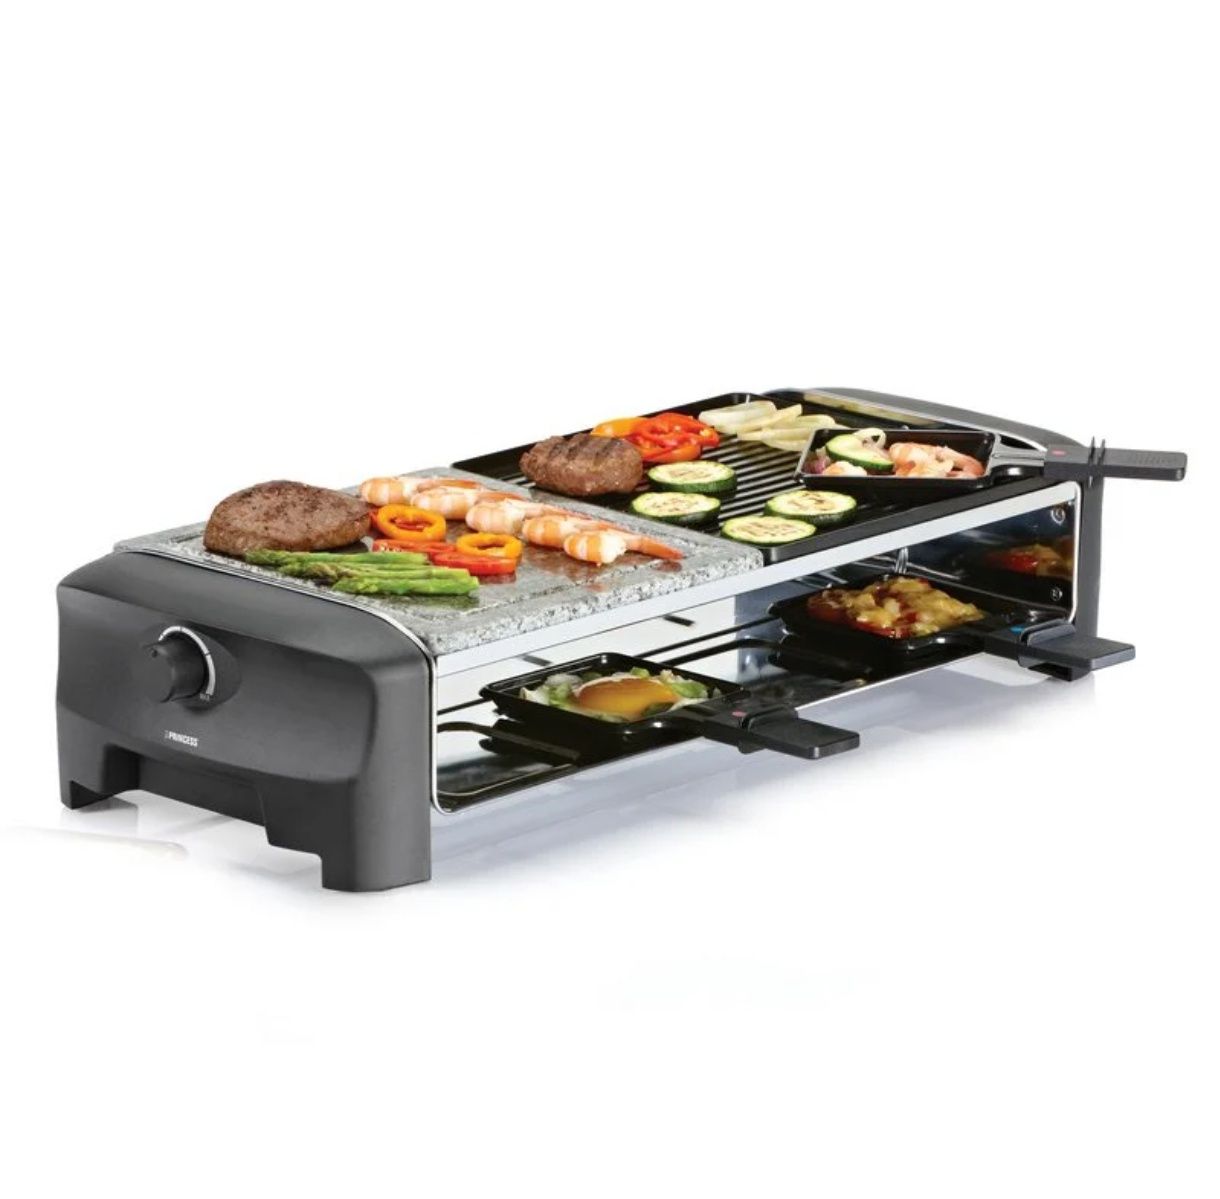 Raclette 8 Stone Grill